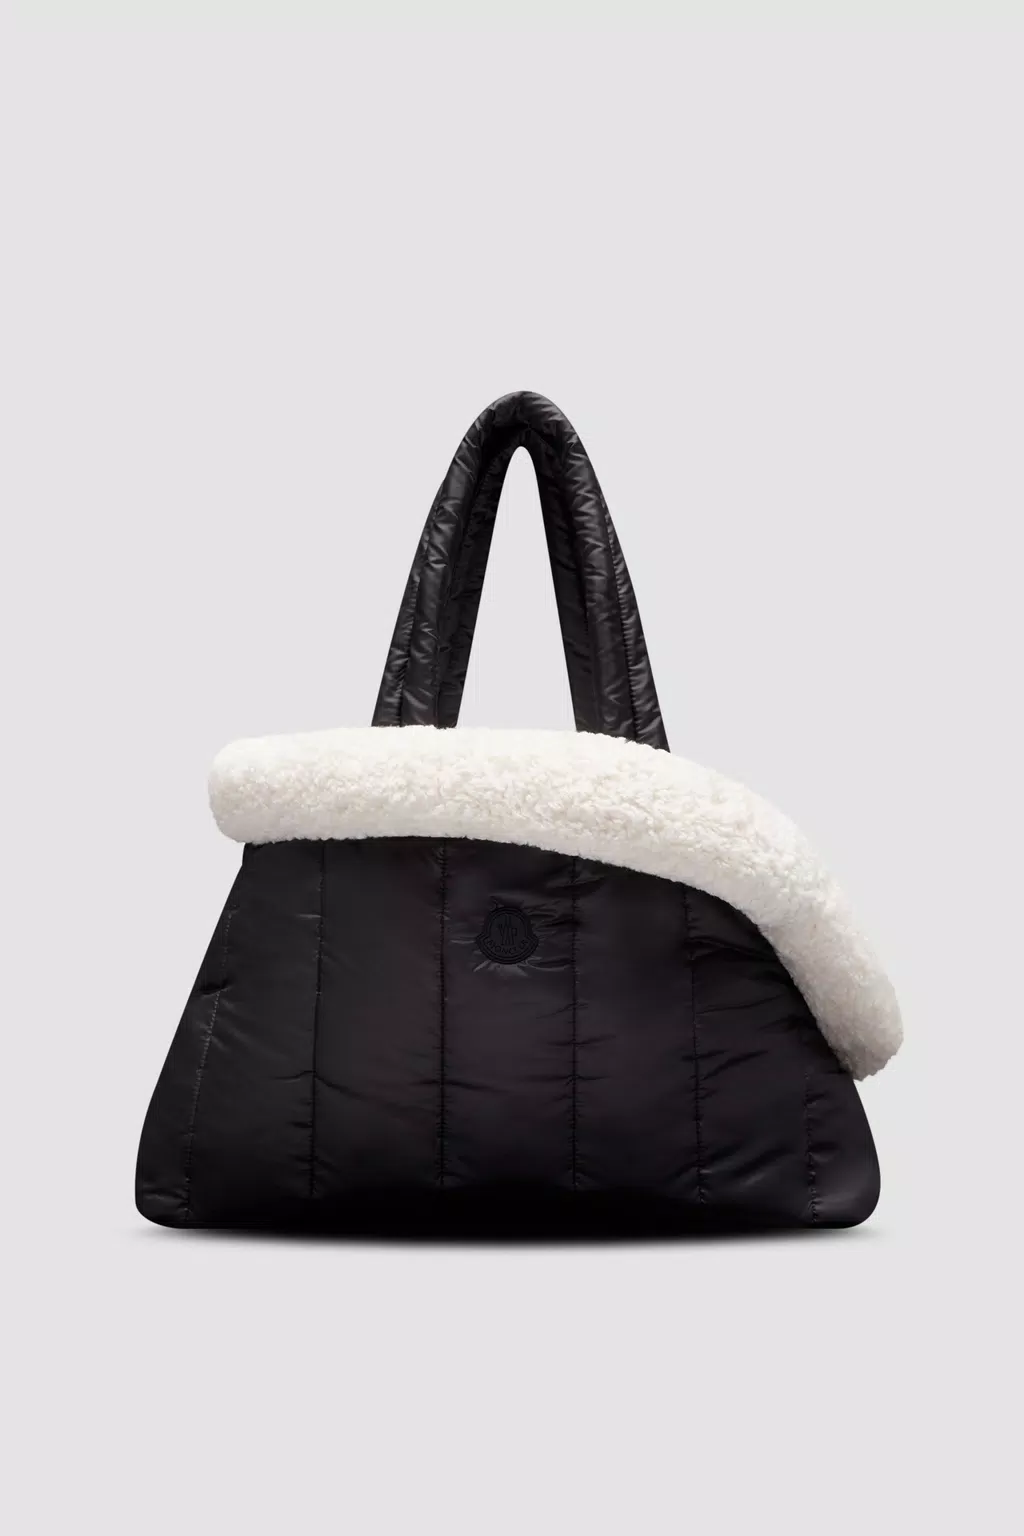 Black Padded Dog Carrier - Moncler Poldo Dog Couture for Special